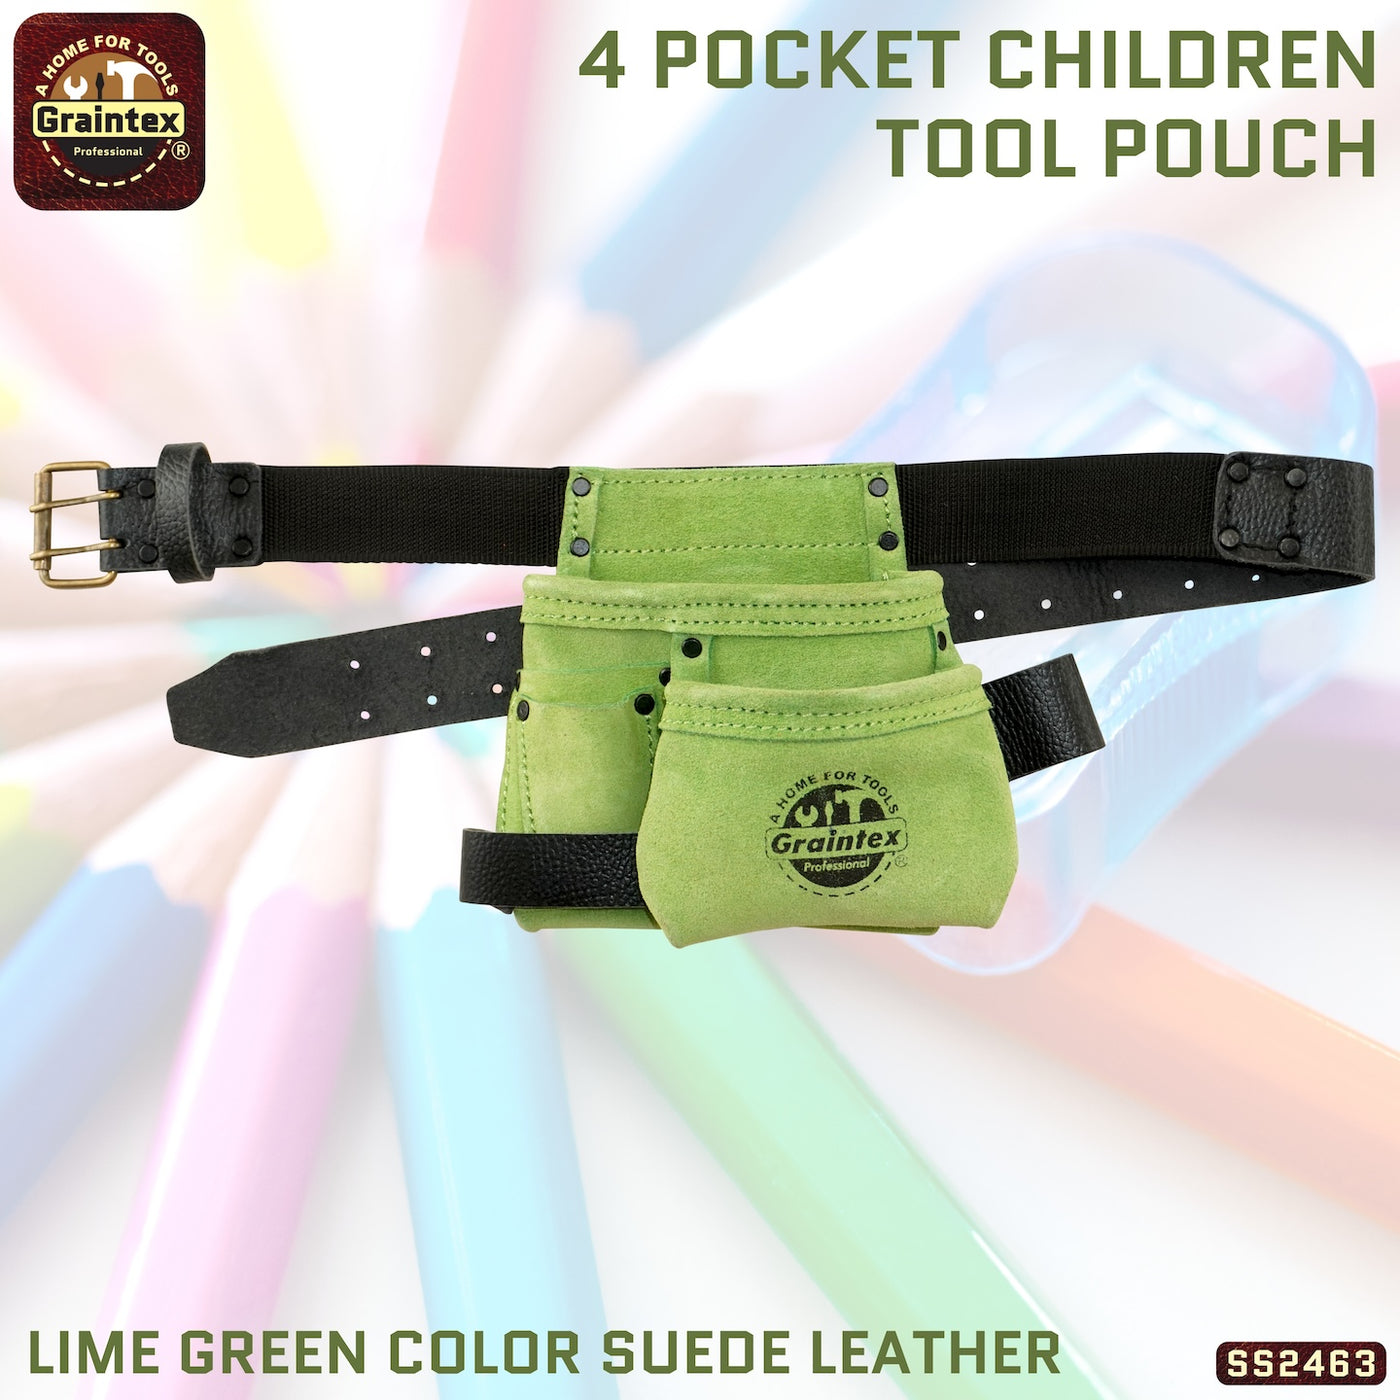 SS2463 :: 4 Pocket Children Tool Pouch Lime Green Color Suede Leather